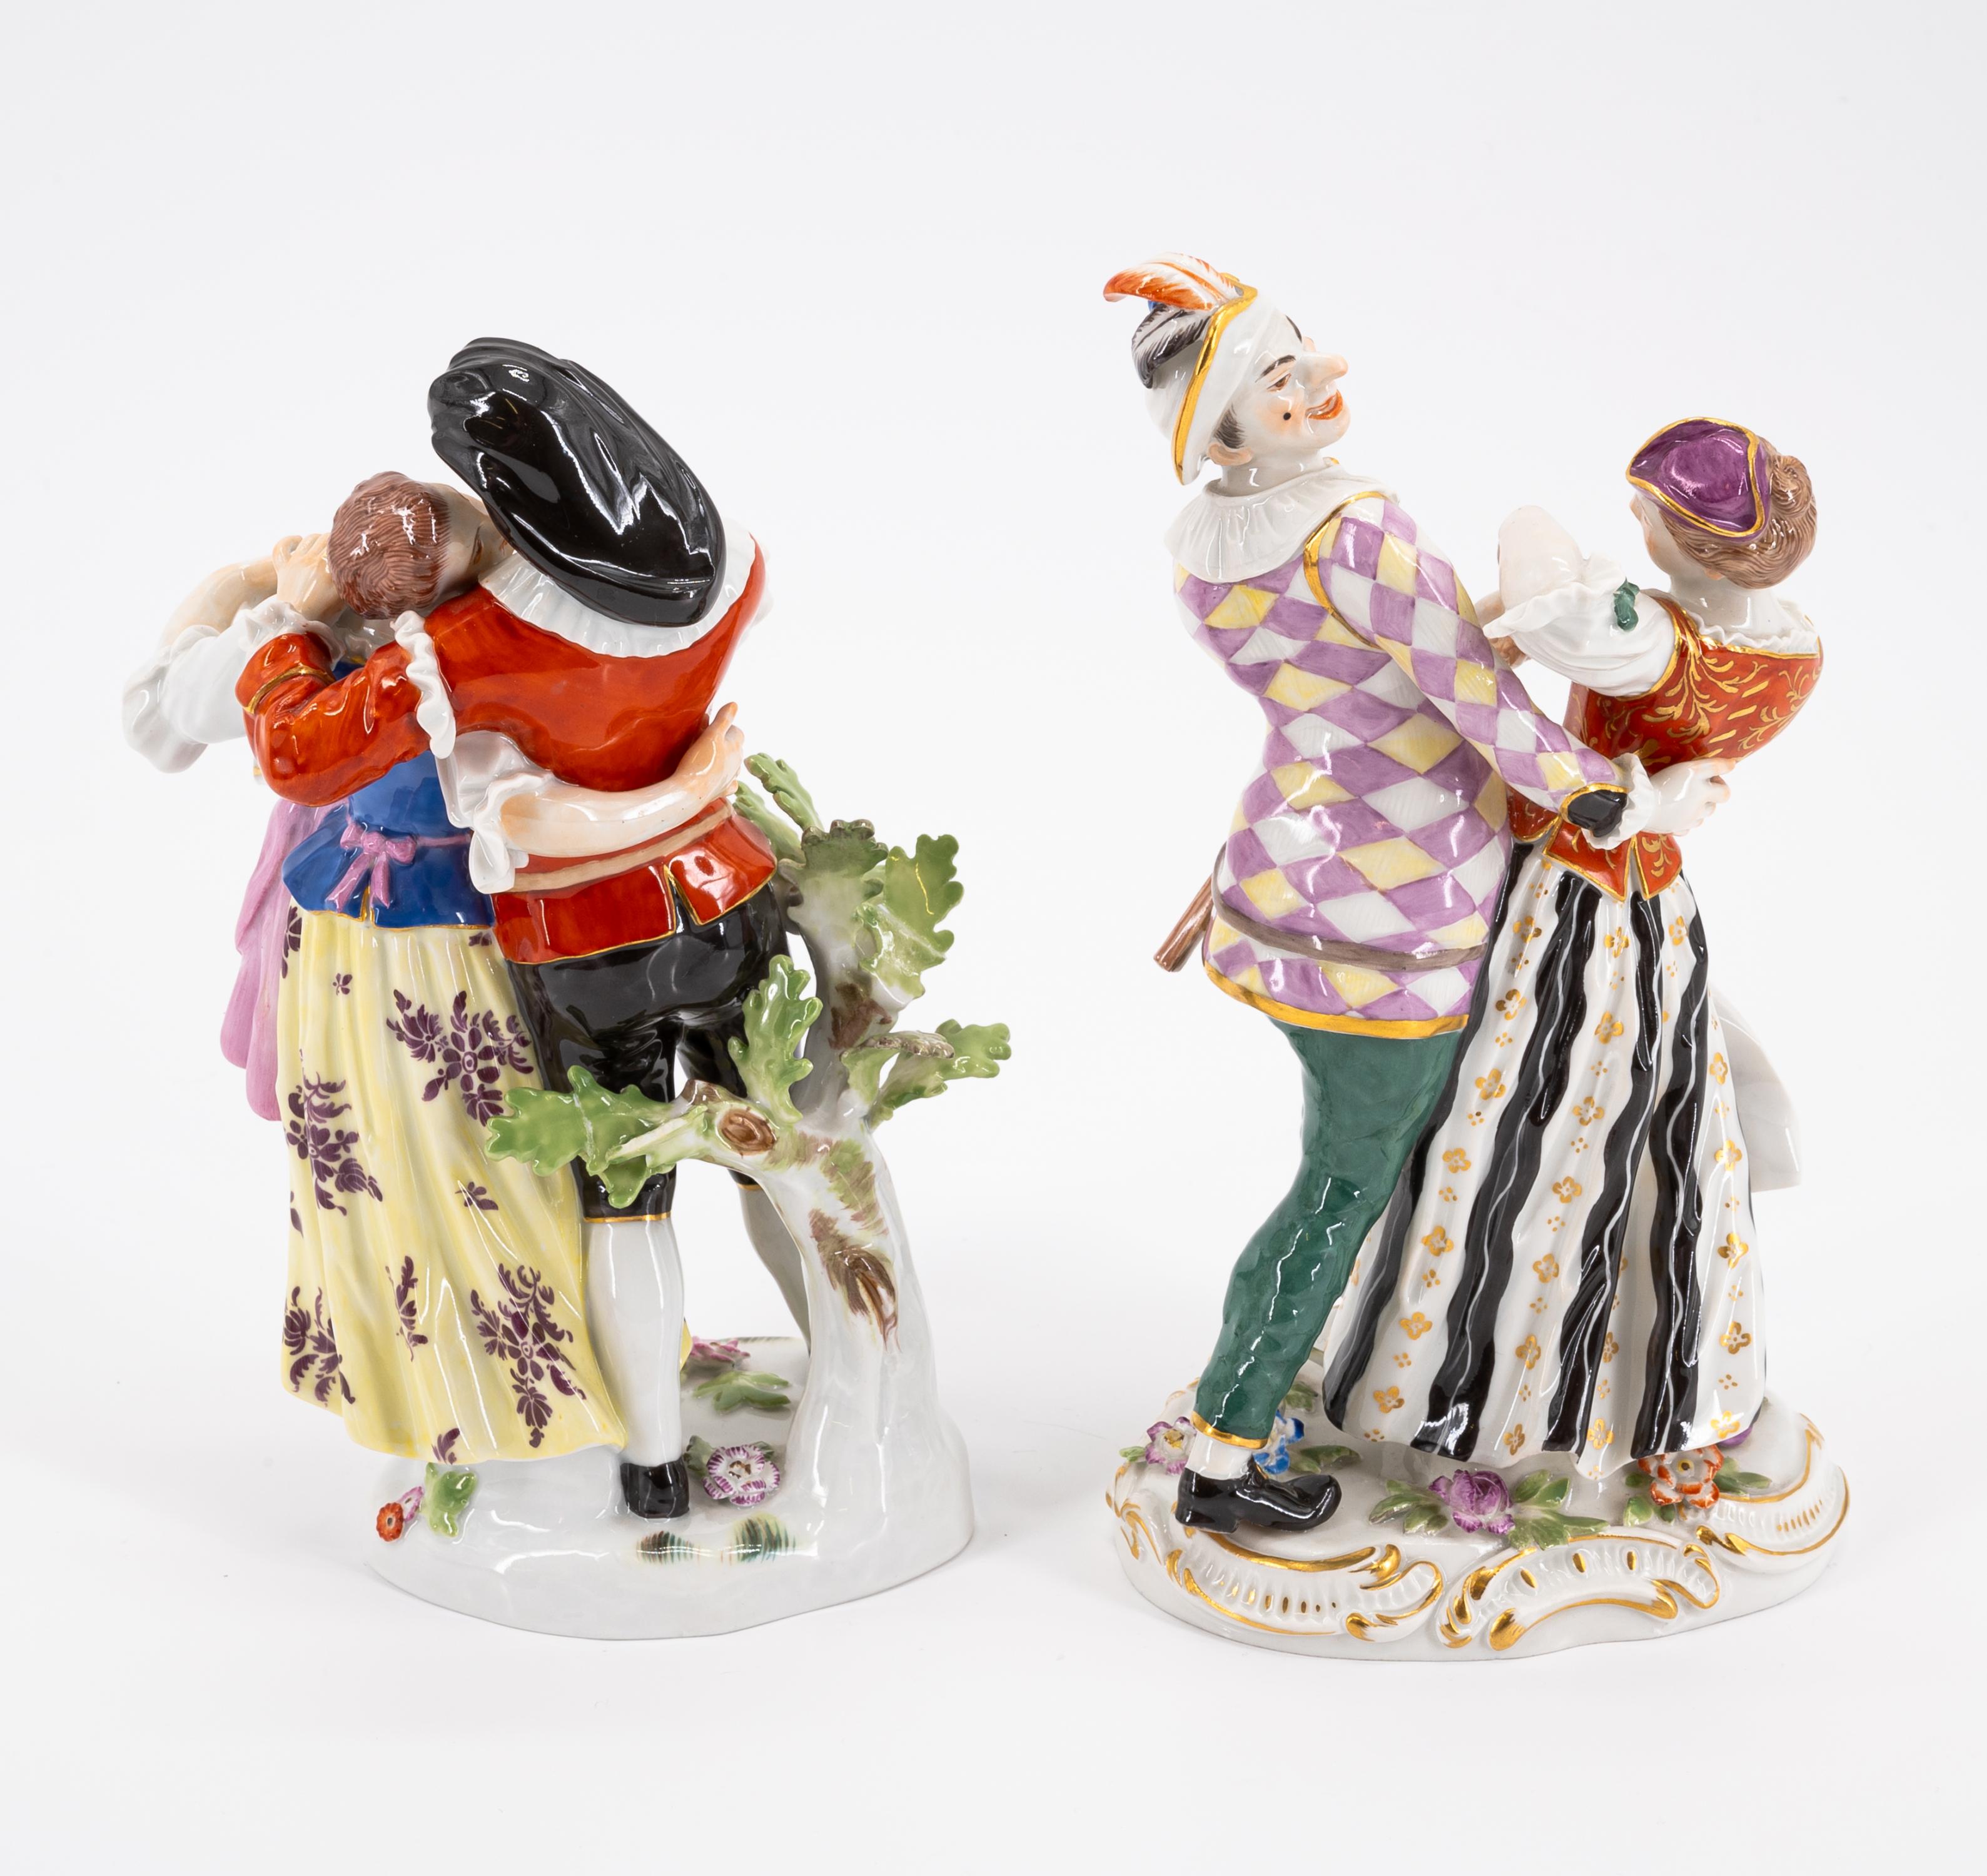 FOUR LARGE PORCELAIN COUPLES FROM THE COMMEDIA DELL'ARTE - Image 3 of 9